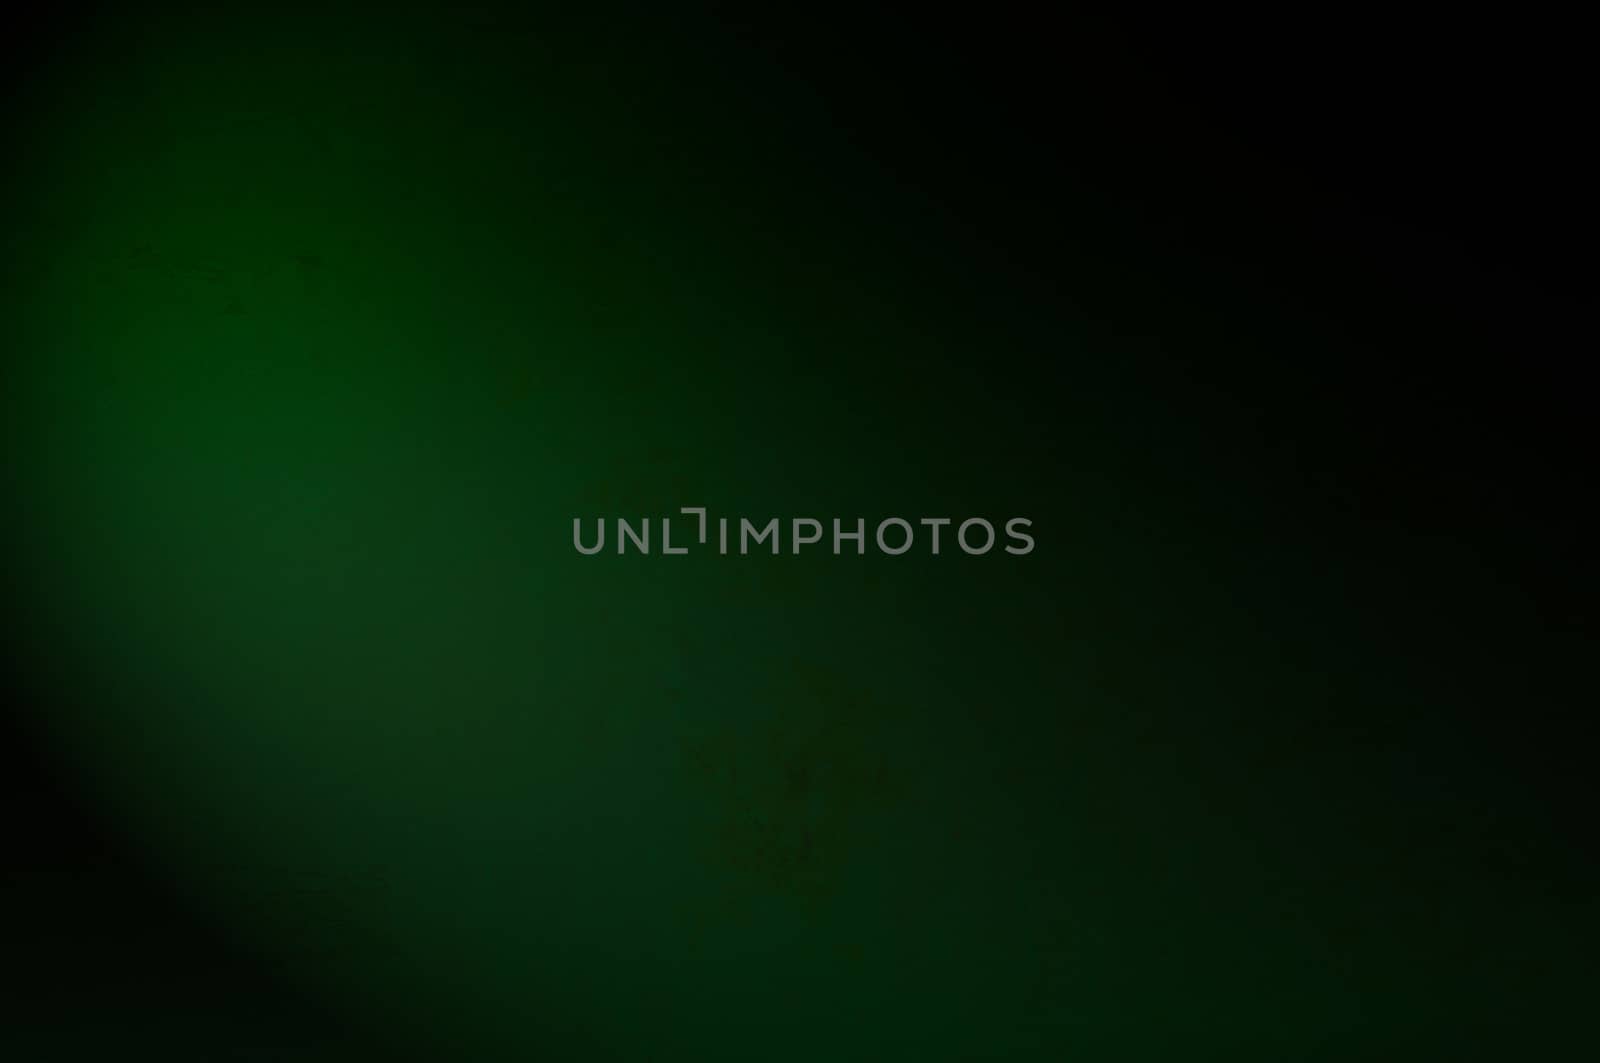 An antique green texture with light effect, to be used as background with images or light colored text.